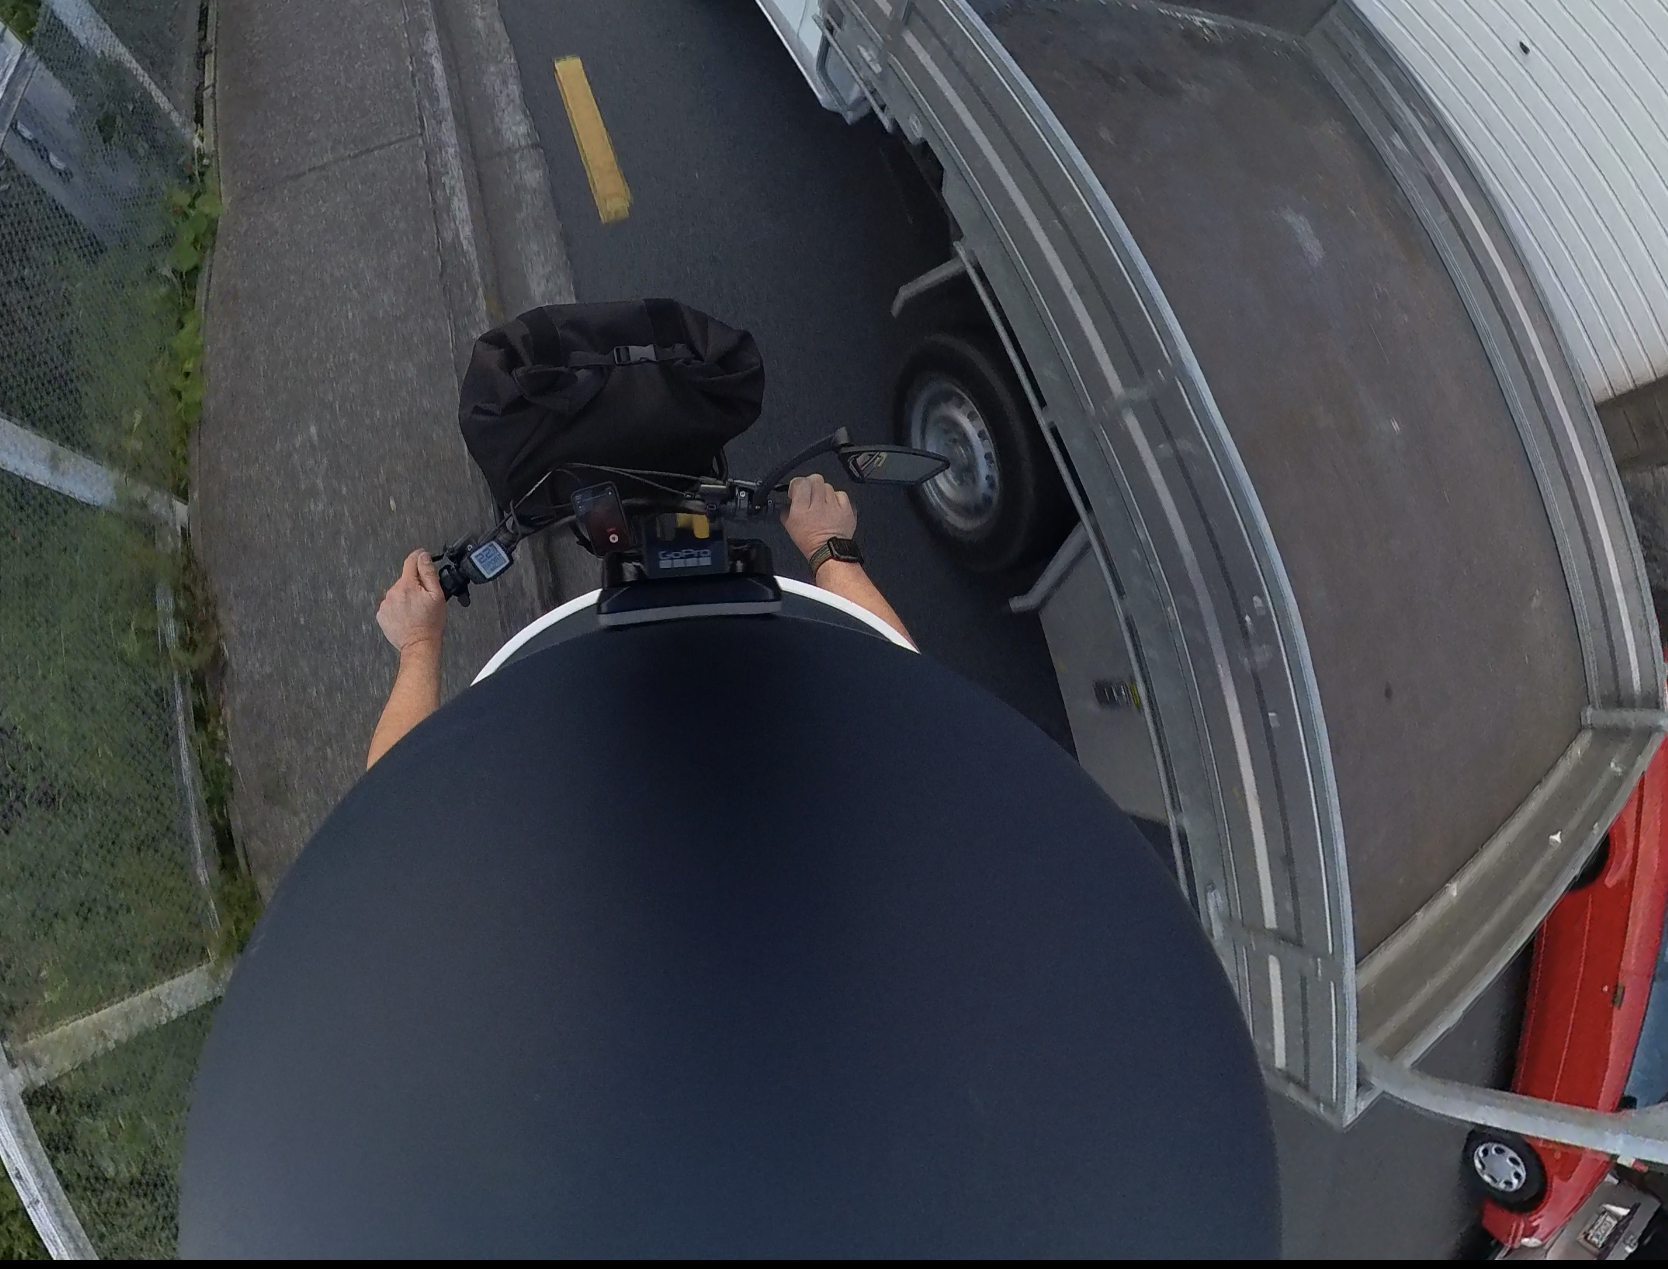 Look at this luncacy. All because he was frustrated having to wait seconds. A photo from my helmet camera showing a ute tray passing me within millimetres. 